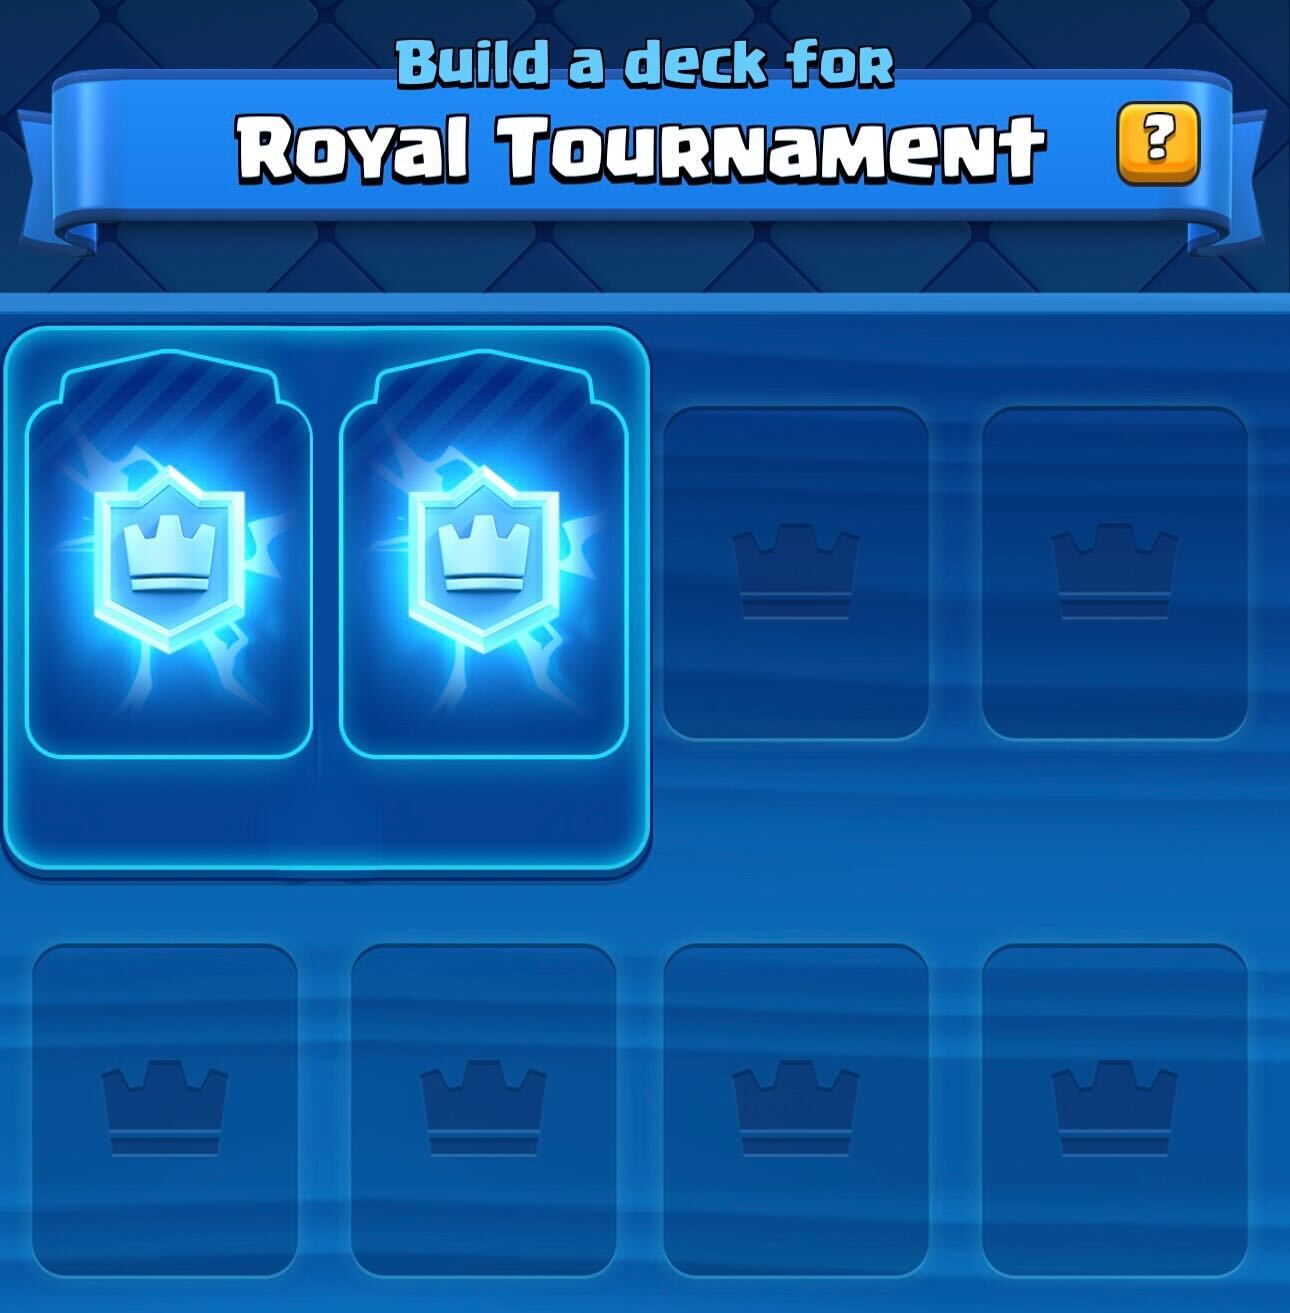 Any way to improve deck stuck in arena 14? : r/ClashRoyale